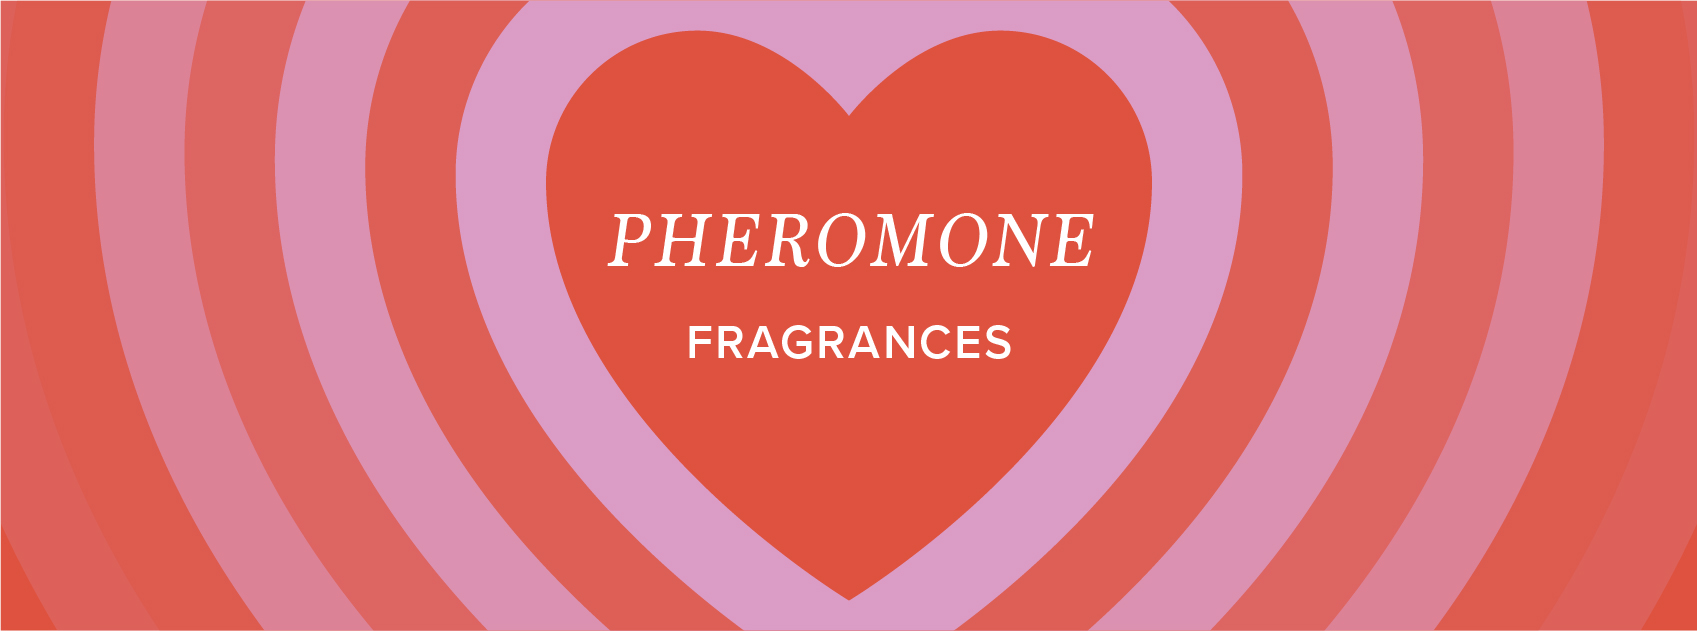 title pheromone fragrances in red and pink hearts